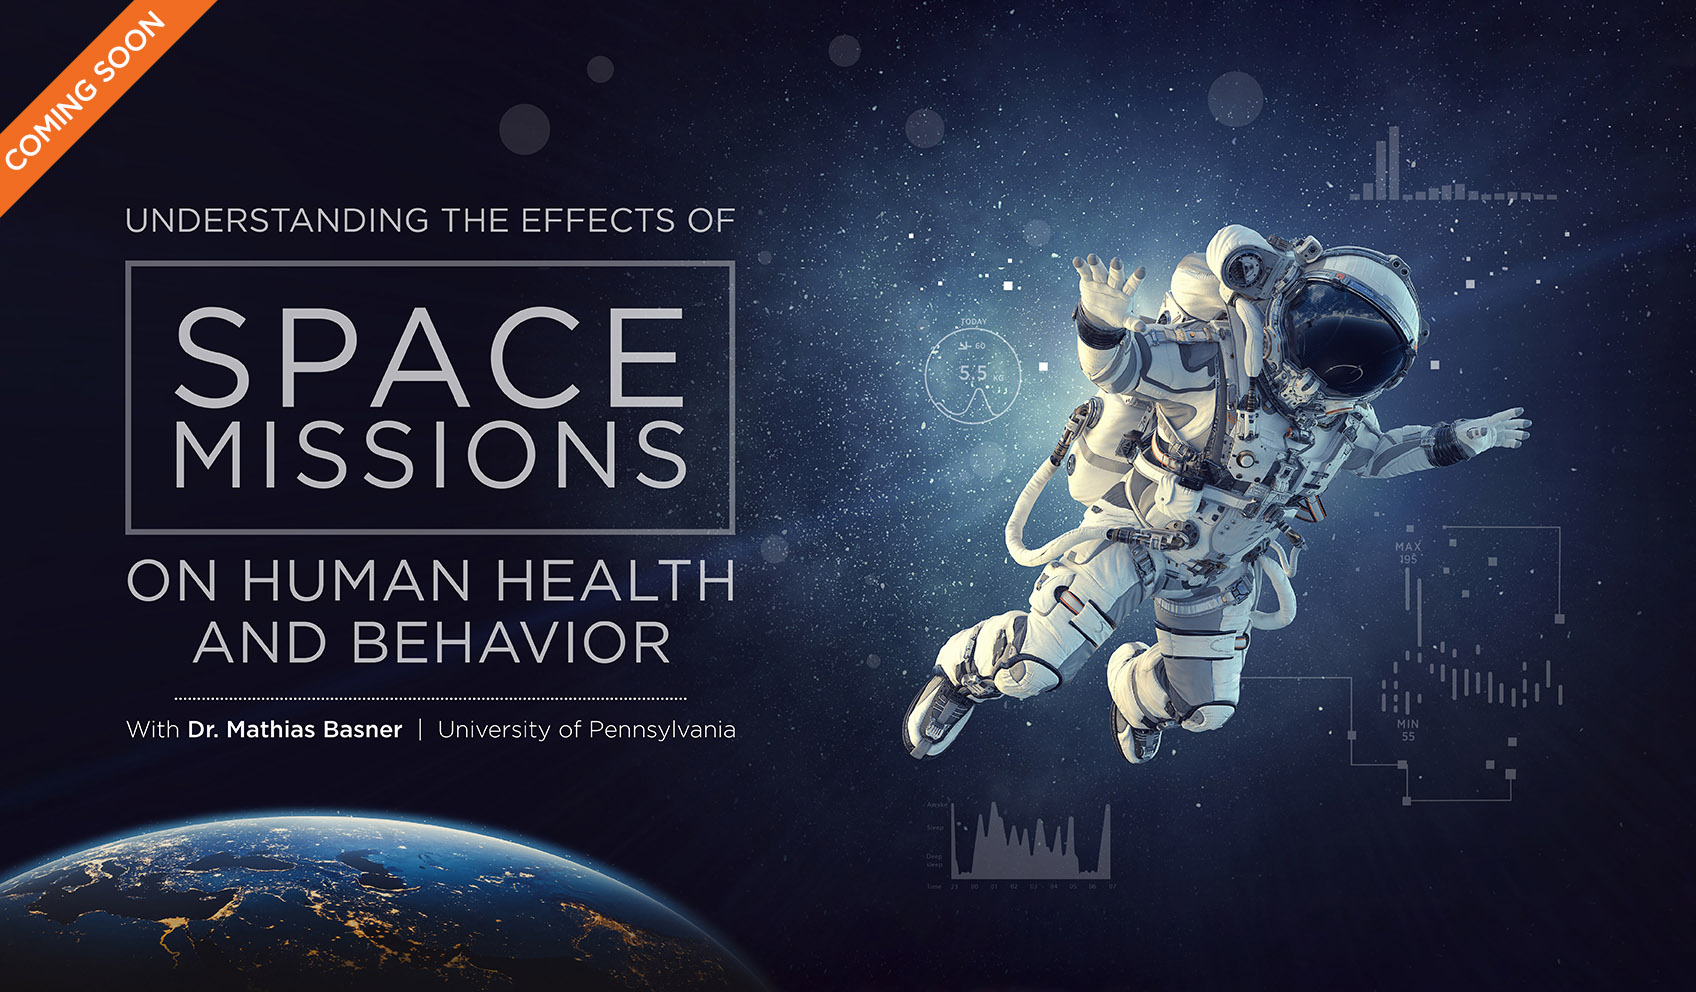 Understanding the Effects of Space Missions on Human Health and Behavior